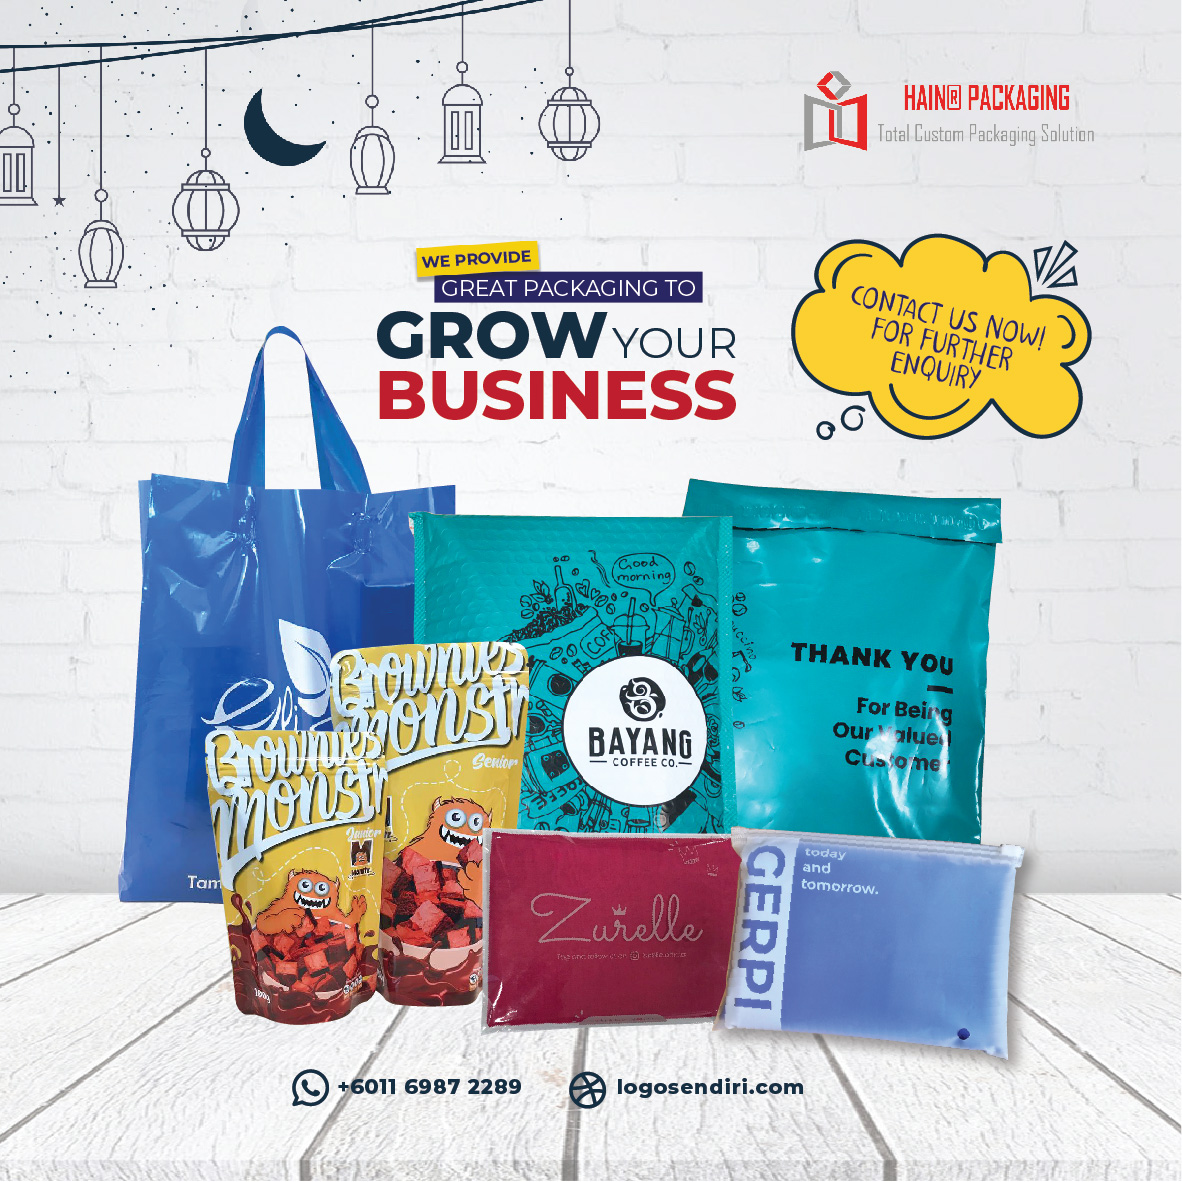 Order your very own customised plastic bags for your brand needs, and have them send to you all the way to Singapore. Just drop us an email or DM us to know more!

wa.me/601169872289

#customisedgoodiebags #customisedplasticbag #internationaldelivery #custompackaging